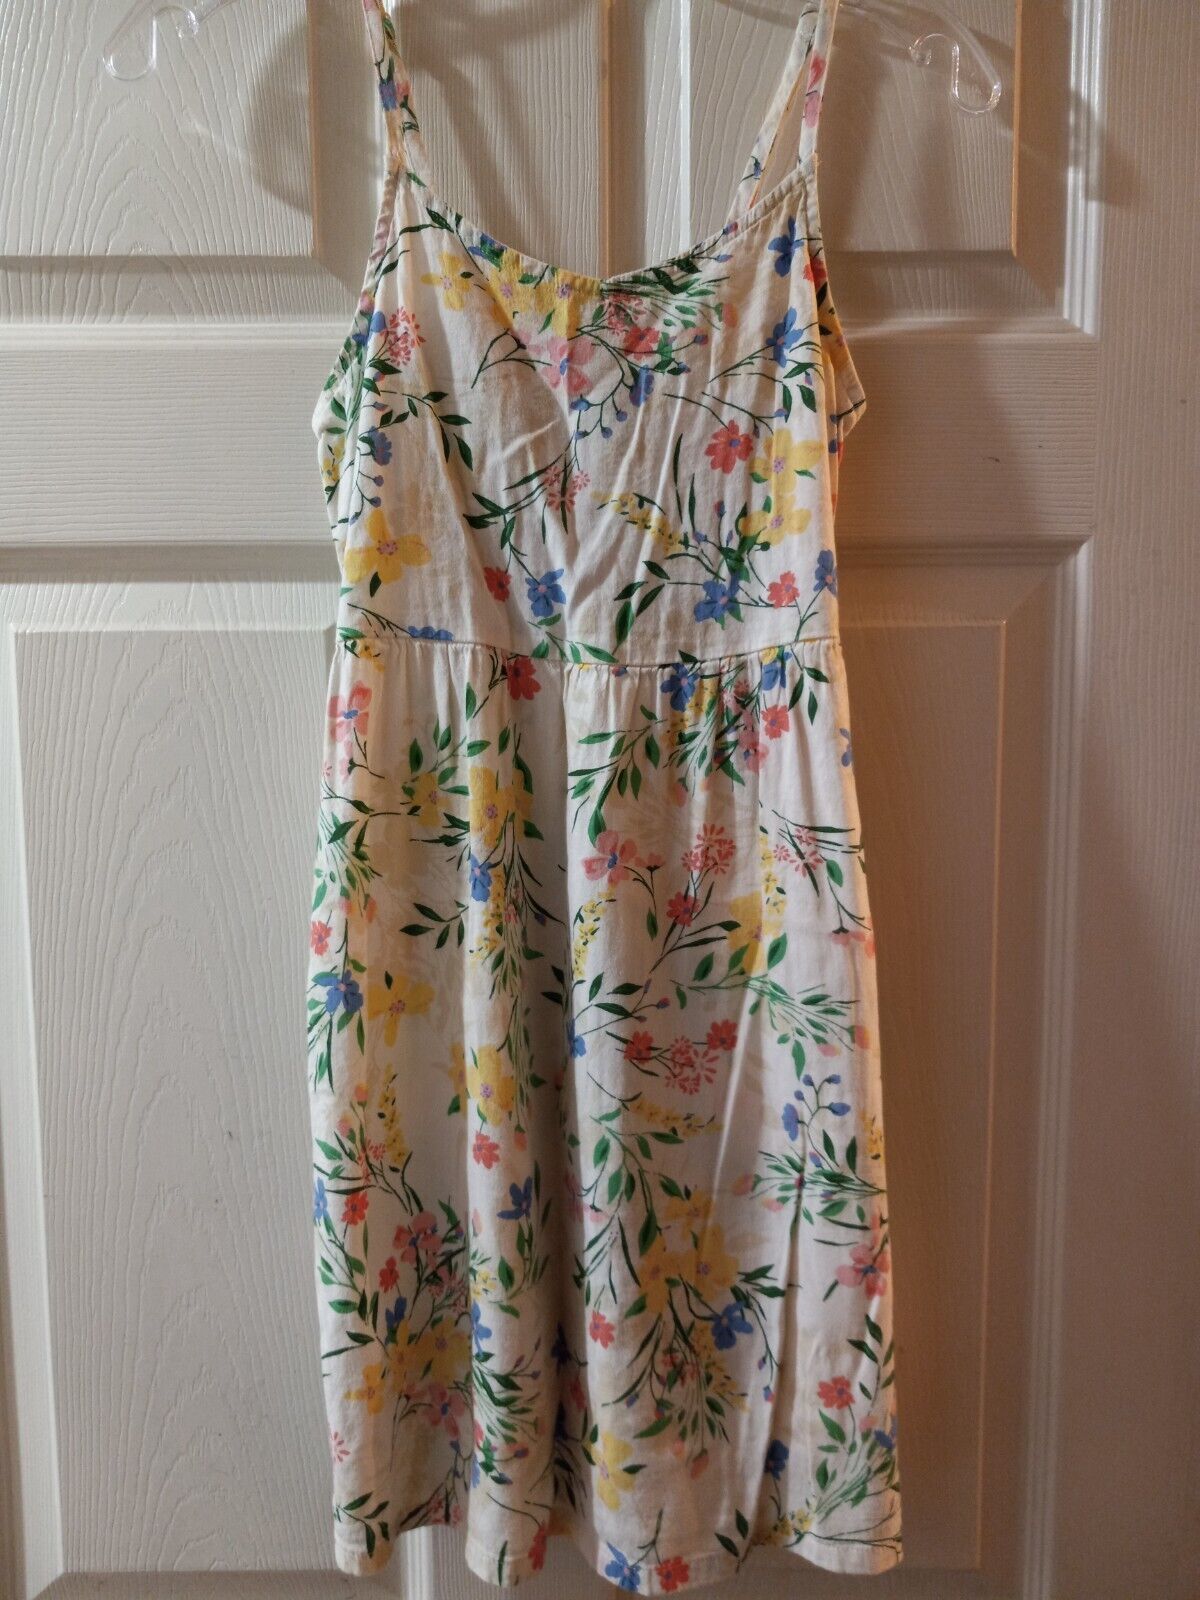 Primary image for Old Navy Girls Dress Size 10/12 Summer Flowers